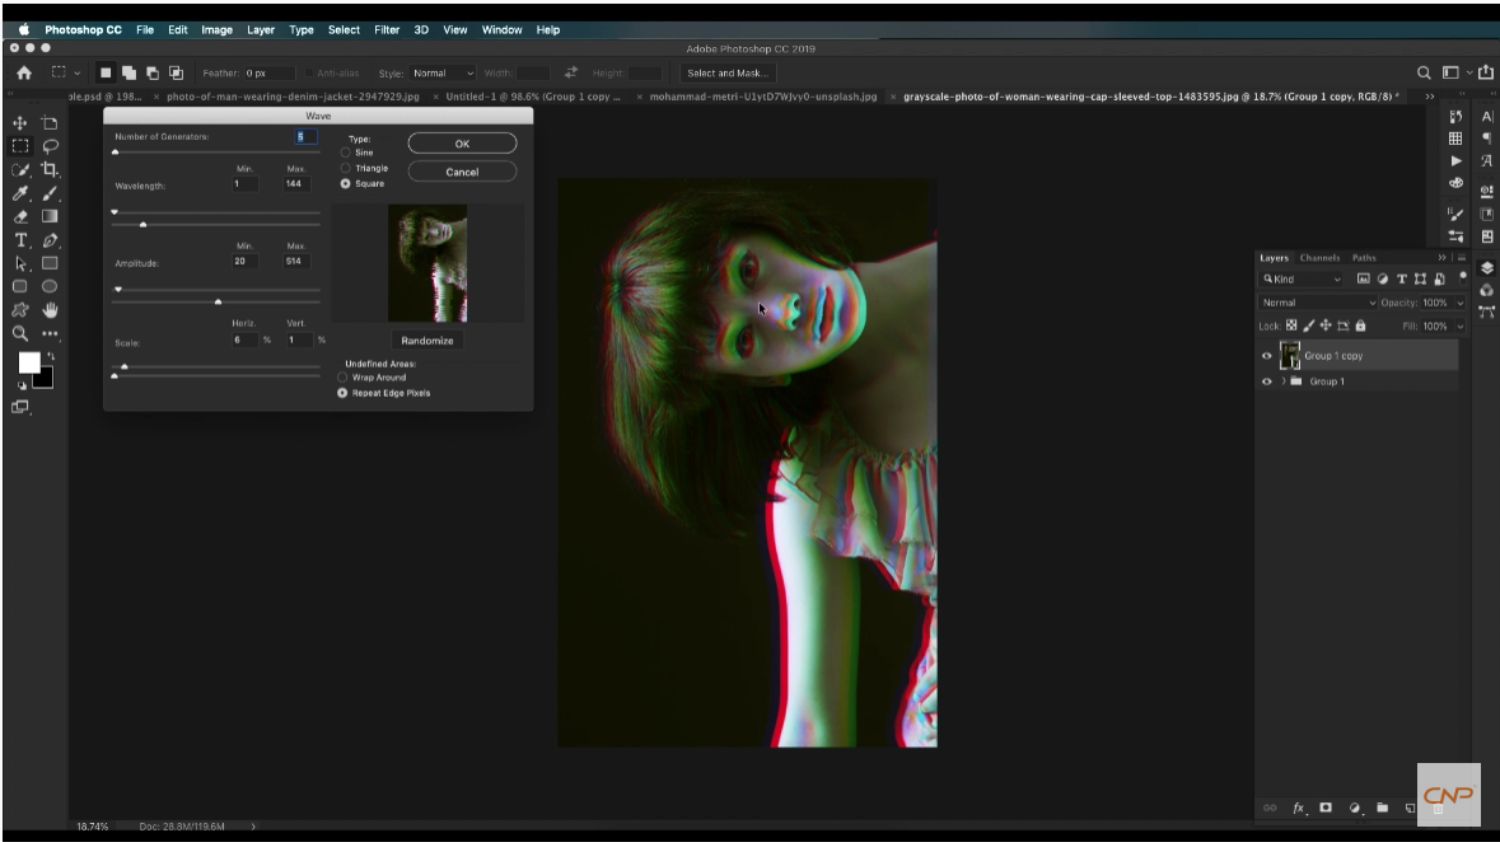 3 Workable Techniques to Get Glitch Effect in Photoshop: Step-by-Step